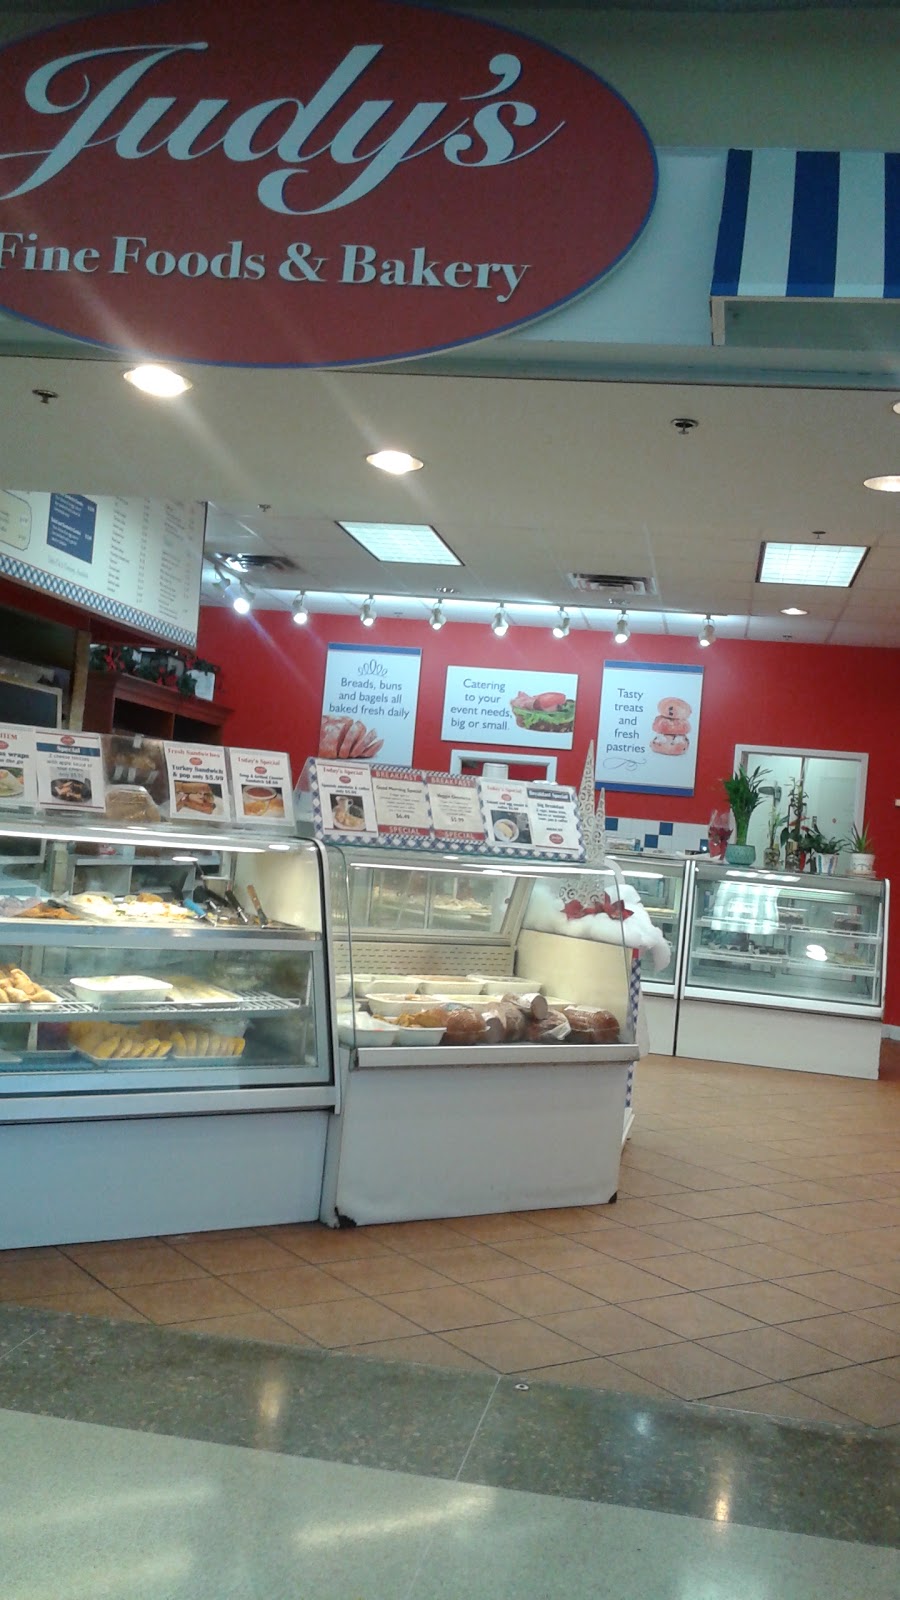 Judys Fine Food & Bakery | 2900 Steeles Ave E, Thornhill, ON L3T 4X1, Canada | Phone: (905) 731-8228